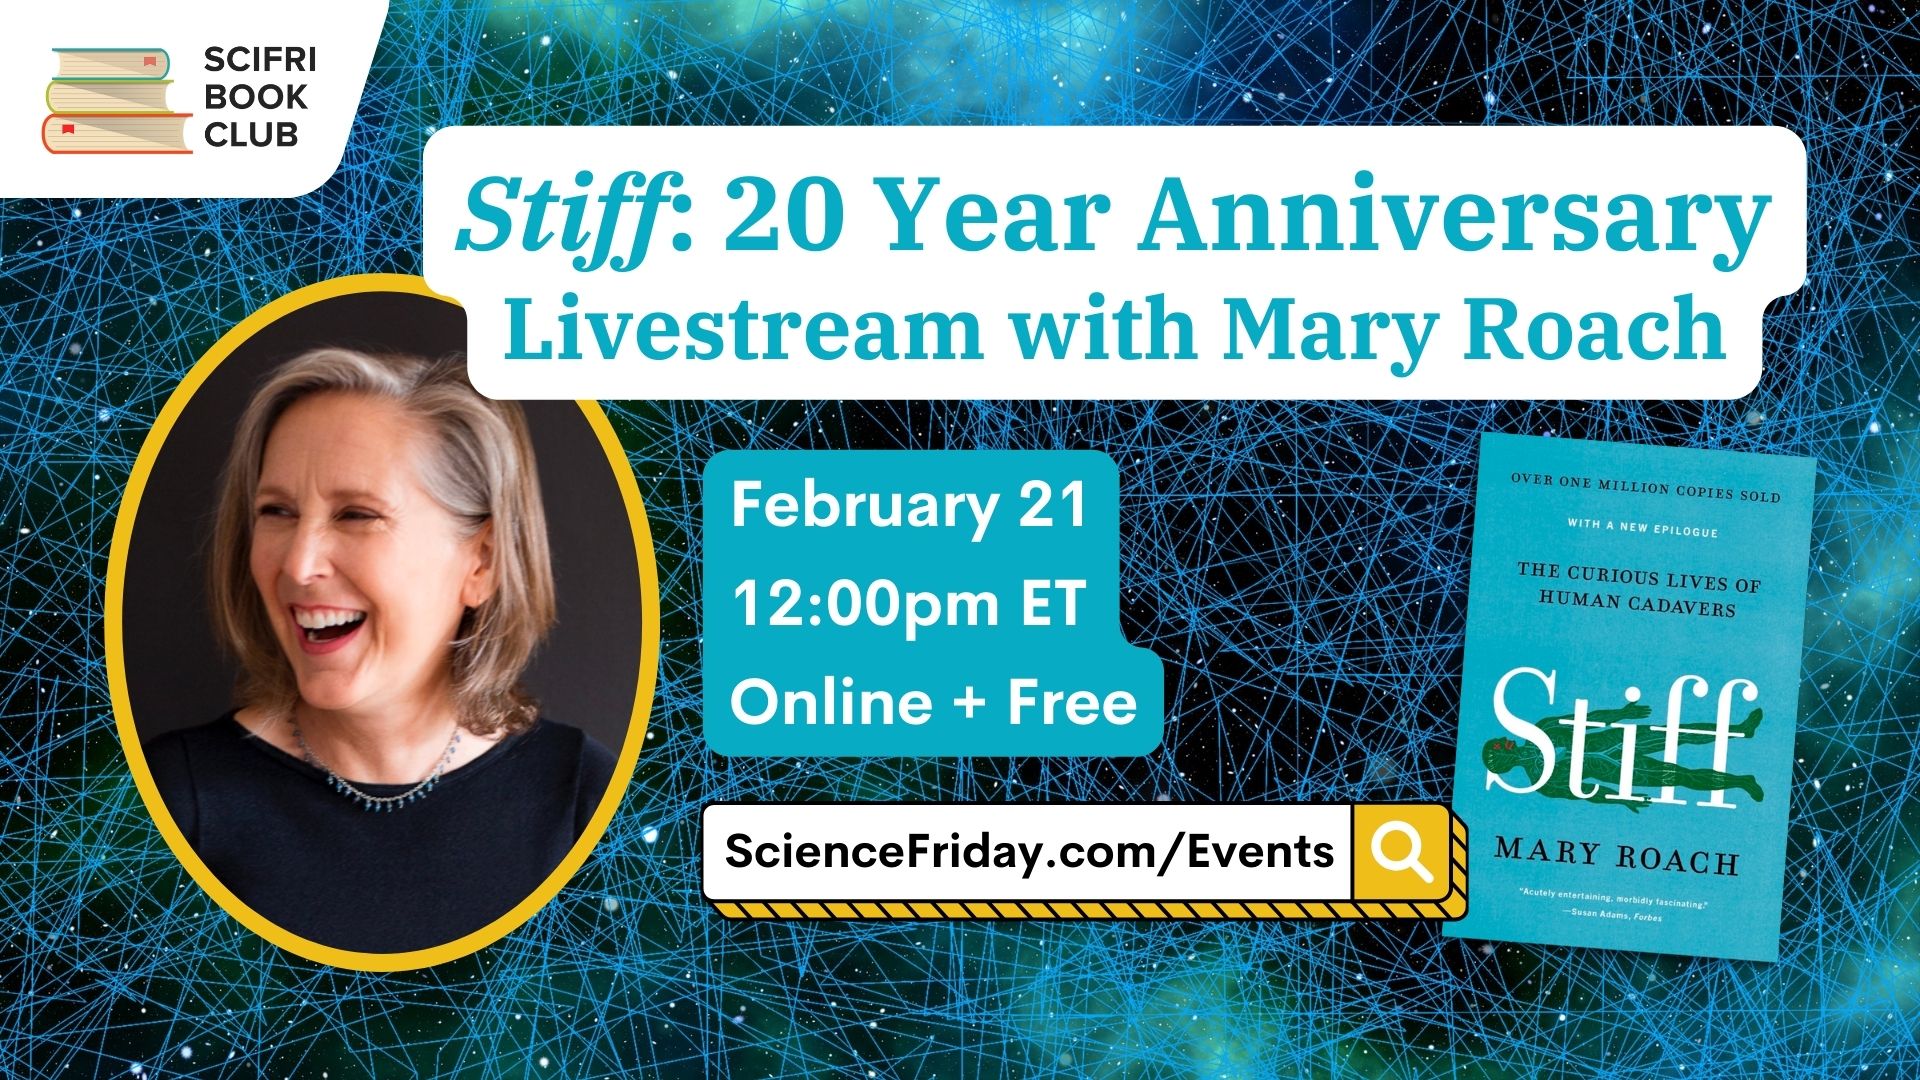 Event promotional image. In the top left corner, SciFri Book Club logo, with event info below: "Stiff: 20 Year Anniversary Livestream with Mary Roach. February 21, 12:00pm ET, Online + Free, ScienceFriday.com/Events." Right side features the book cover of STIFF by Mary Roach. Left side features a headshot of Mary Roach. The background is an abstract illustration of foggy blue under small crisscrossing line and dots.